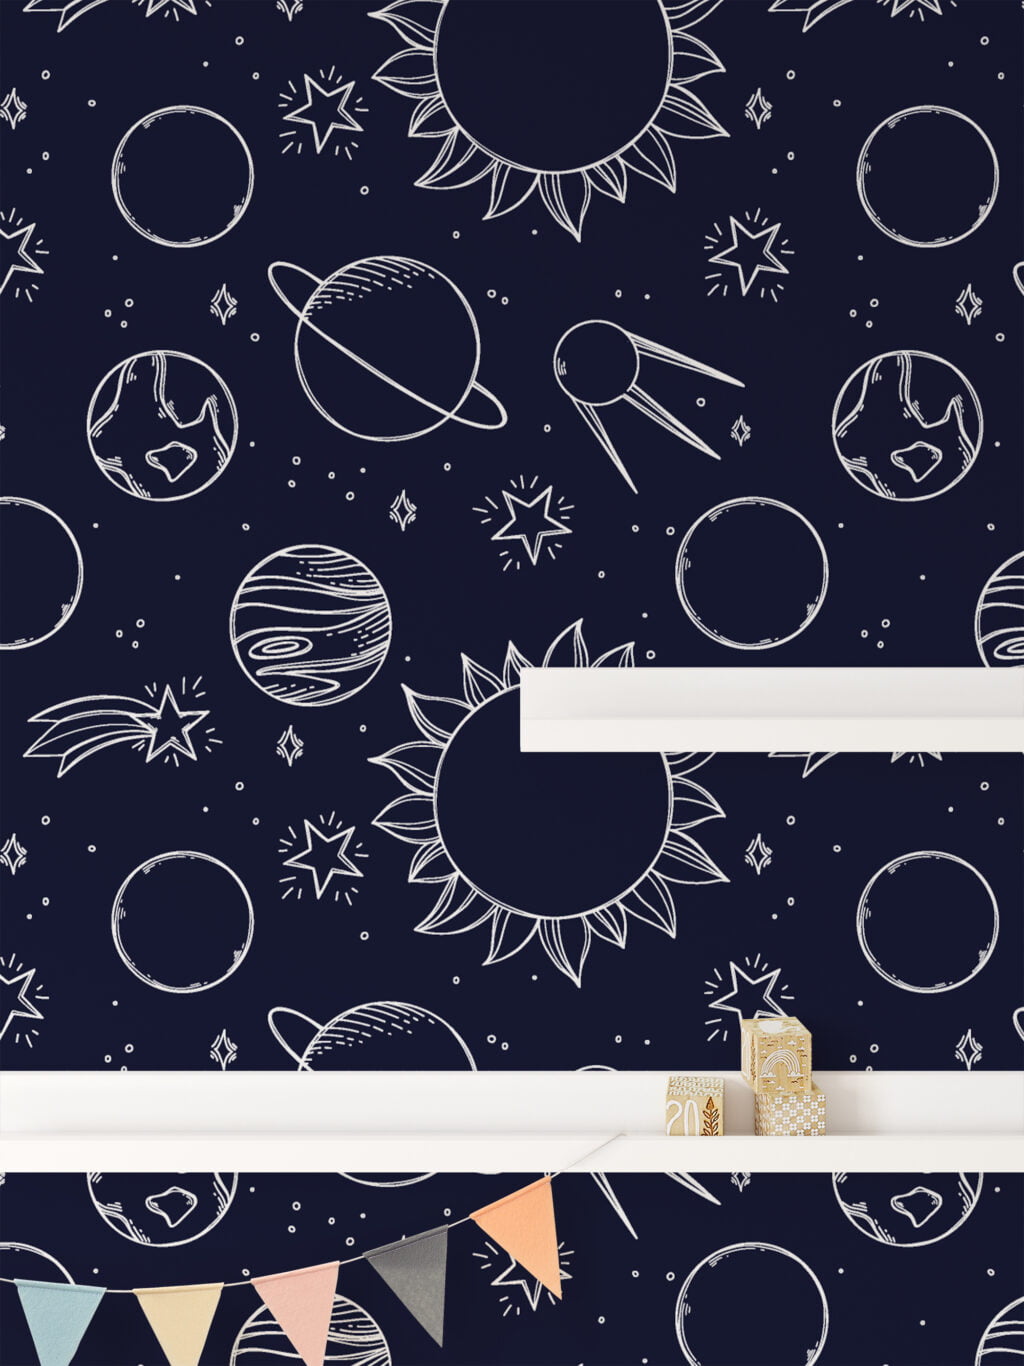 Planets And Space Line Art Design Wallpaper, Navy Cosmic Pattern Peel & Stick Wall Mural